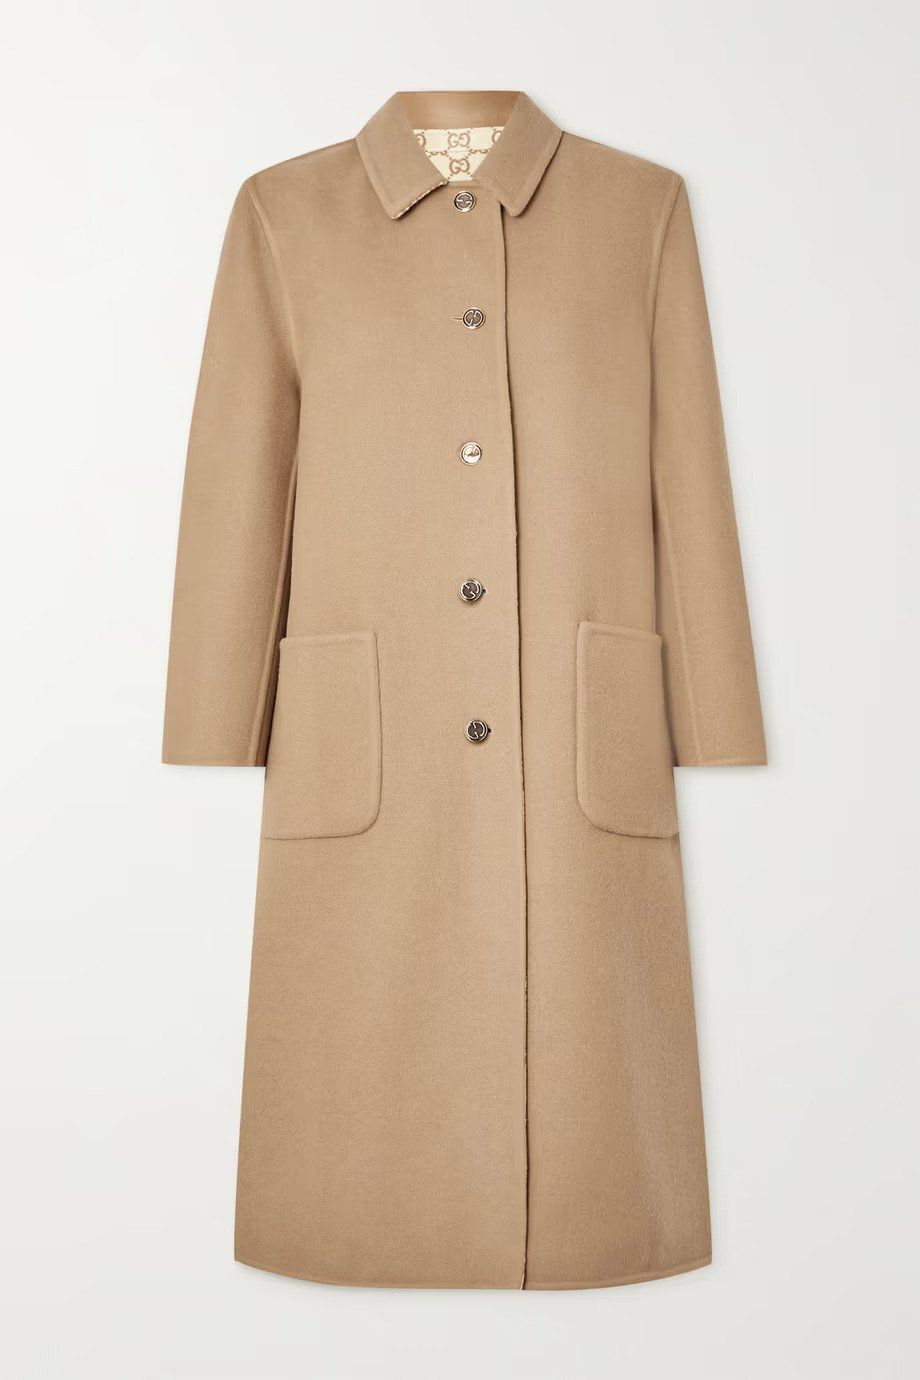 Womens Wool Coat Lapel Belted Wrap Pea Overcoat Casual Long Sleeve Trench Outwear Jacket with Pockets 